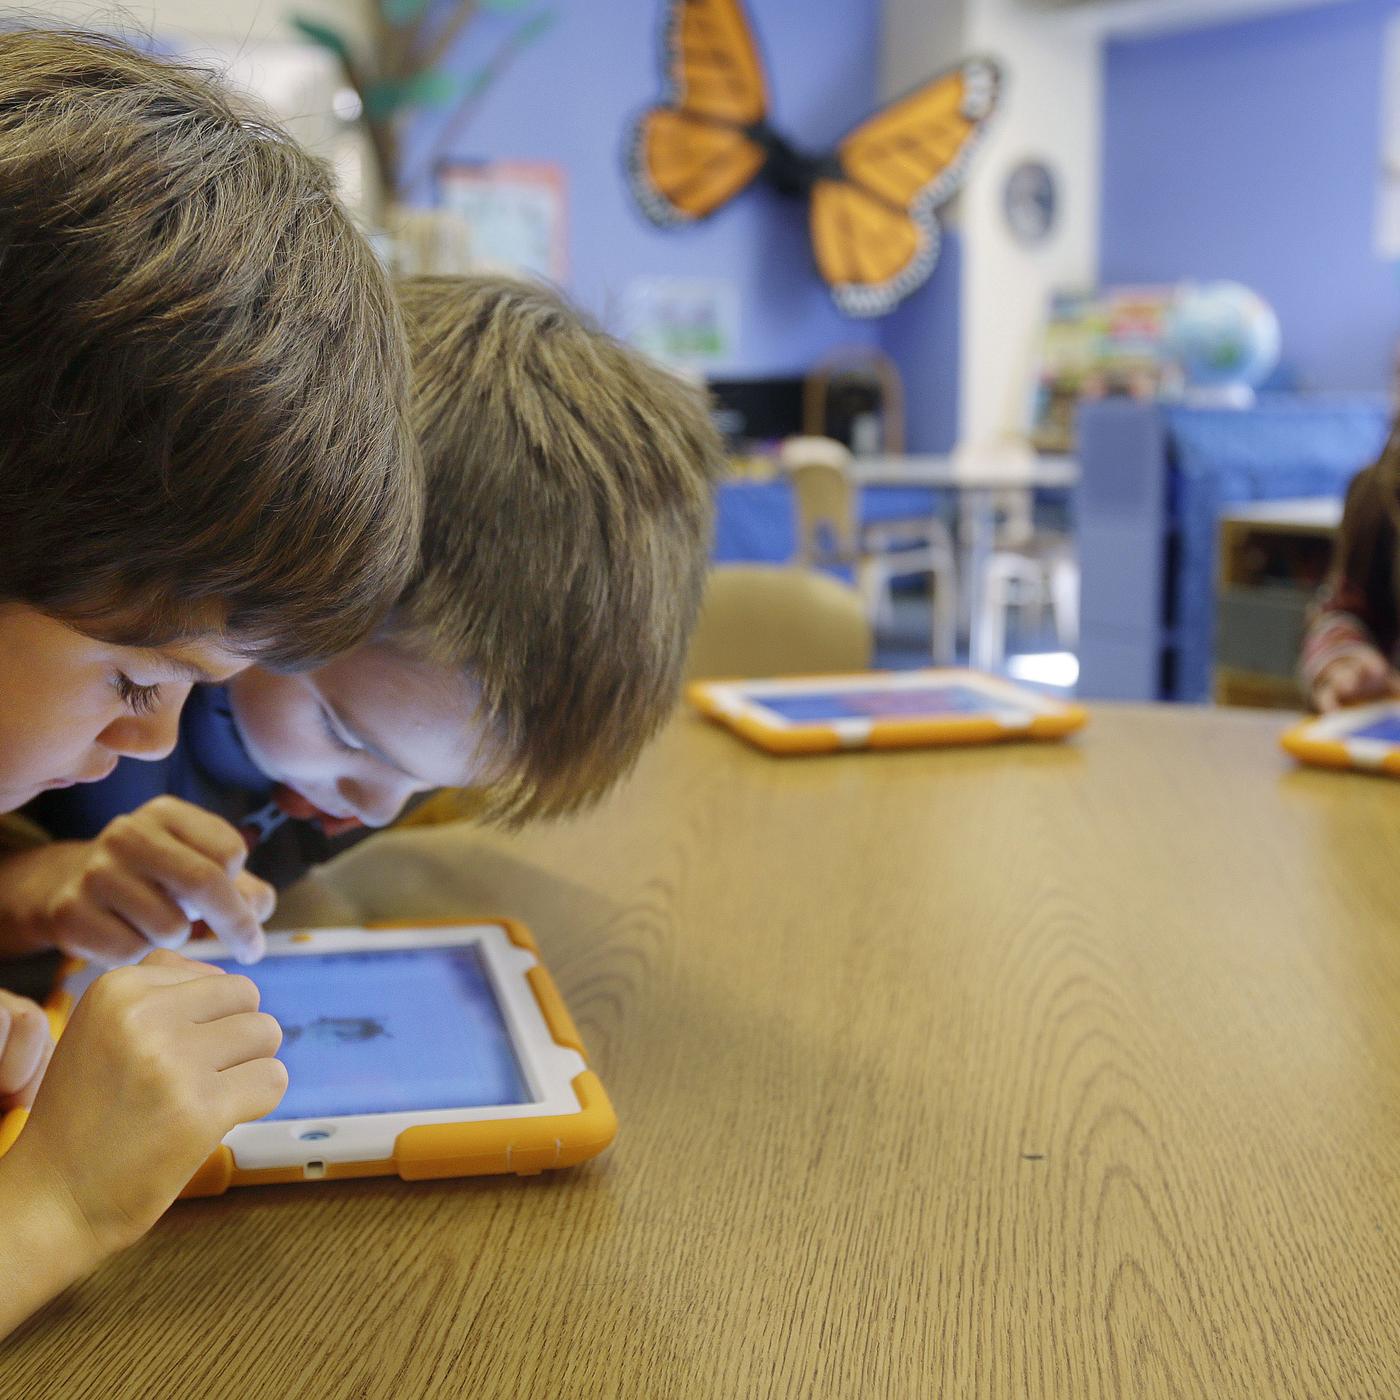 The Case for Getting Tech Out of the Classroom